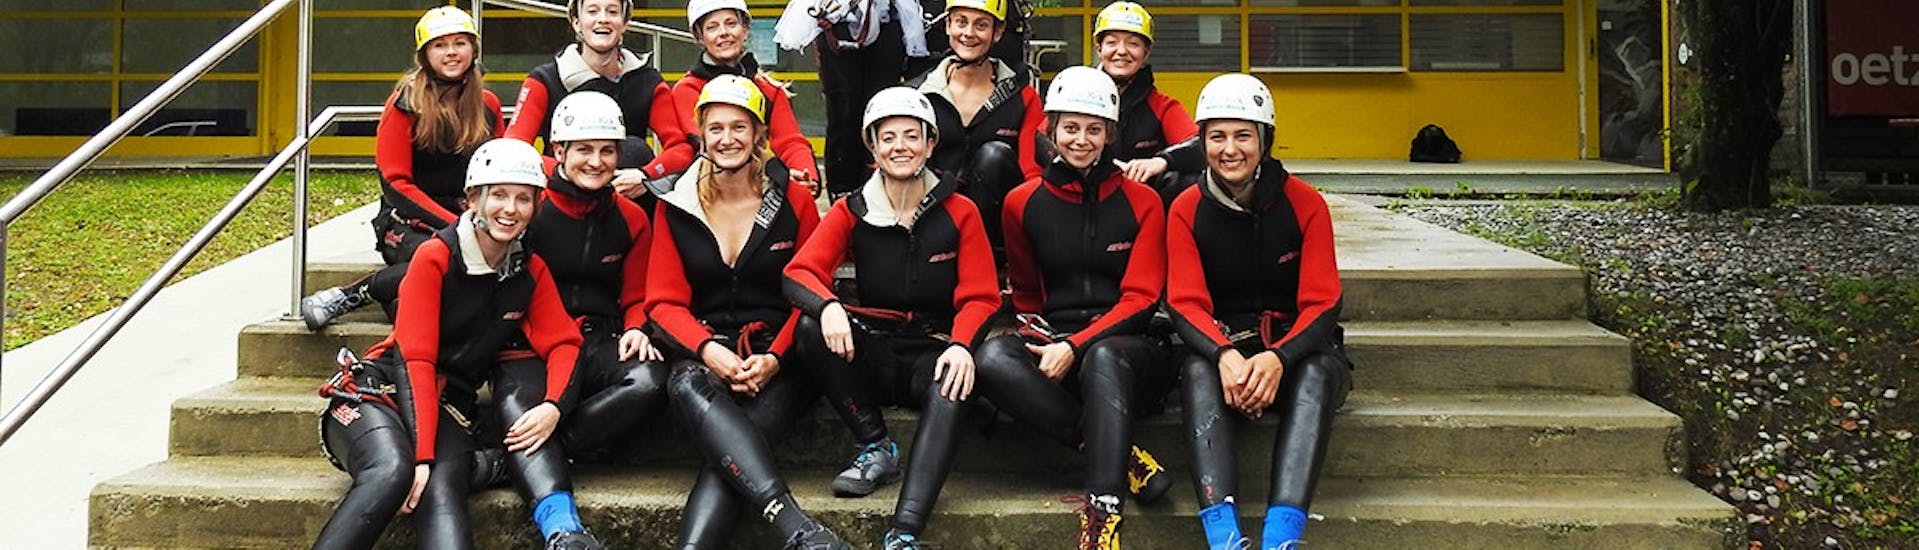 Group picture after Rafting in the Imster Schlucht - Girlspower with CanKick-Ötztal.